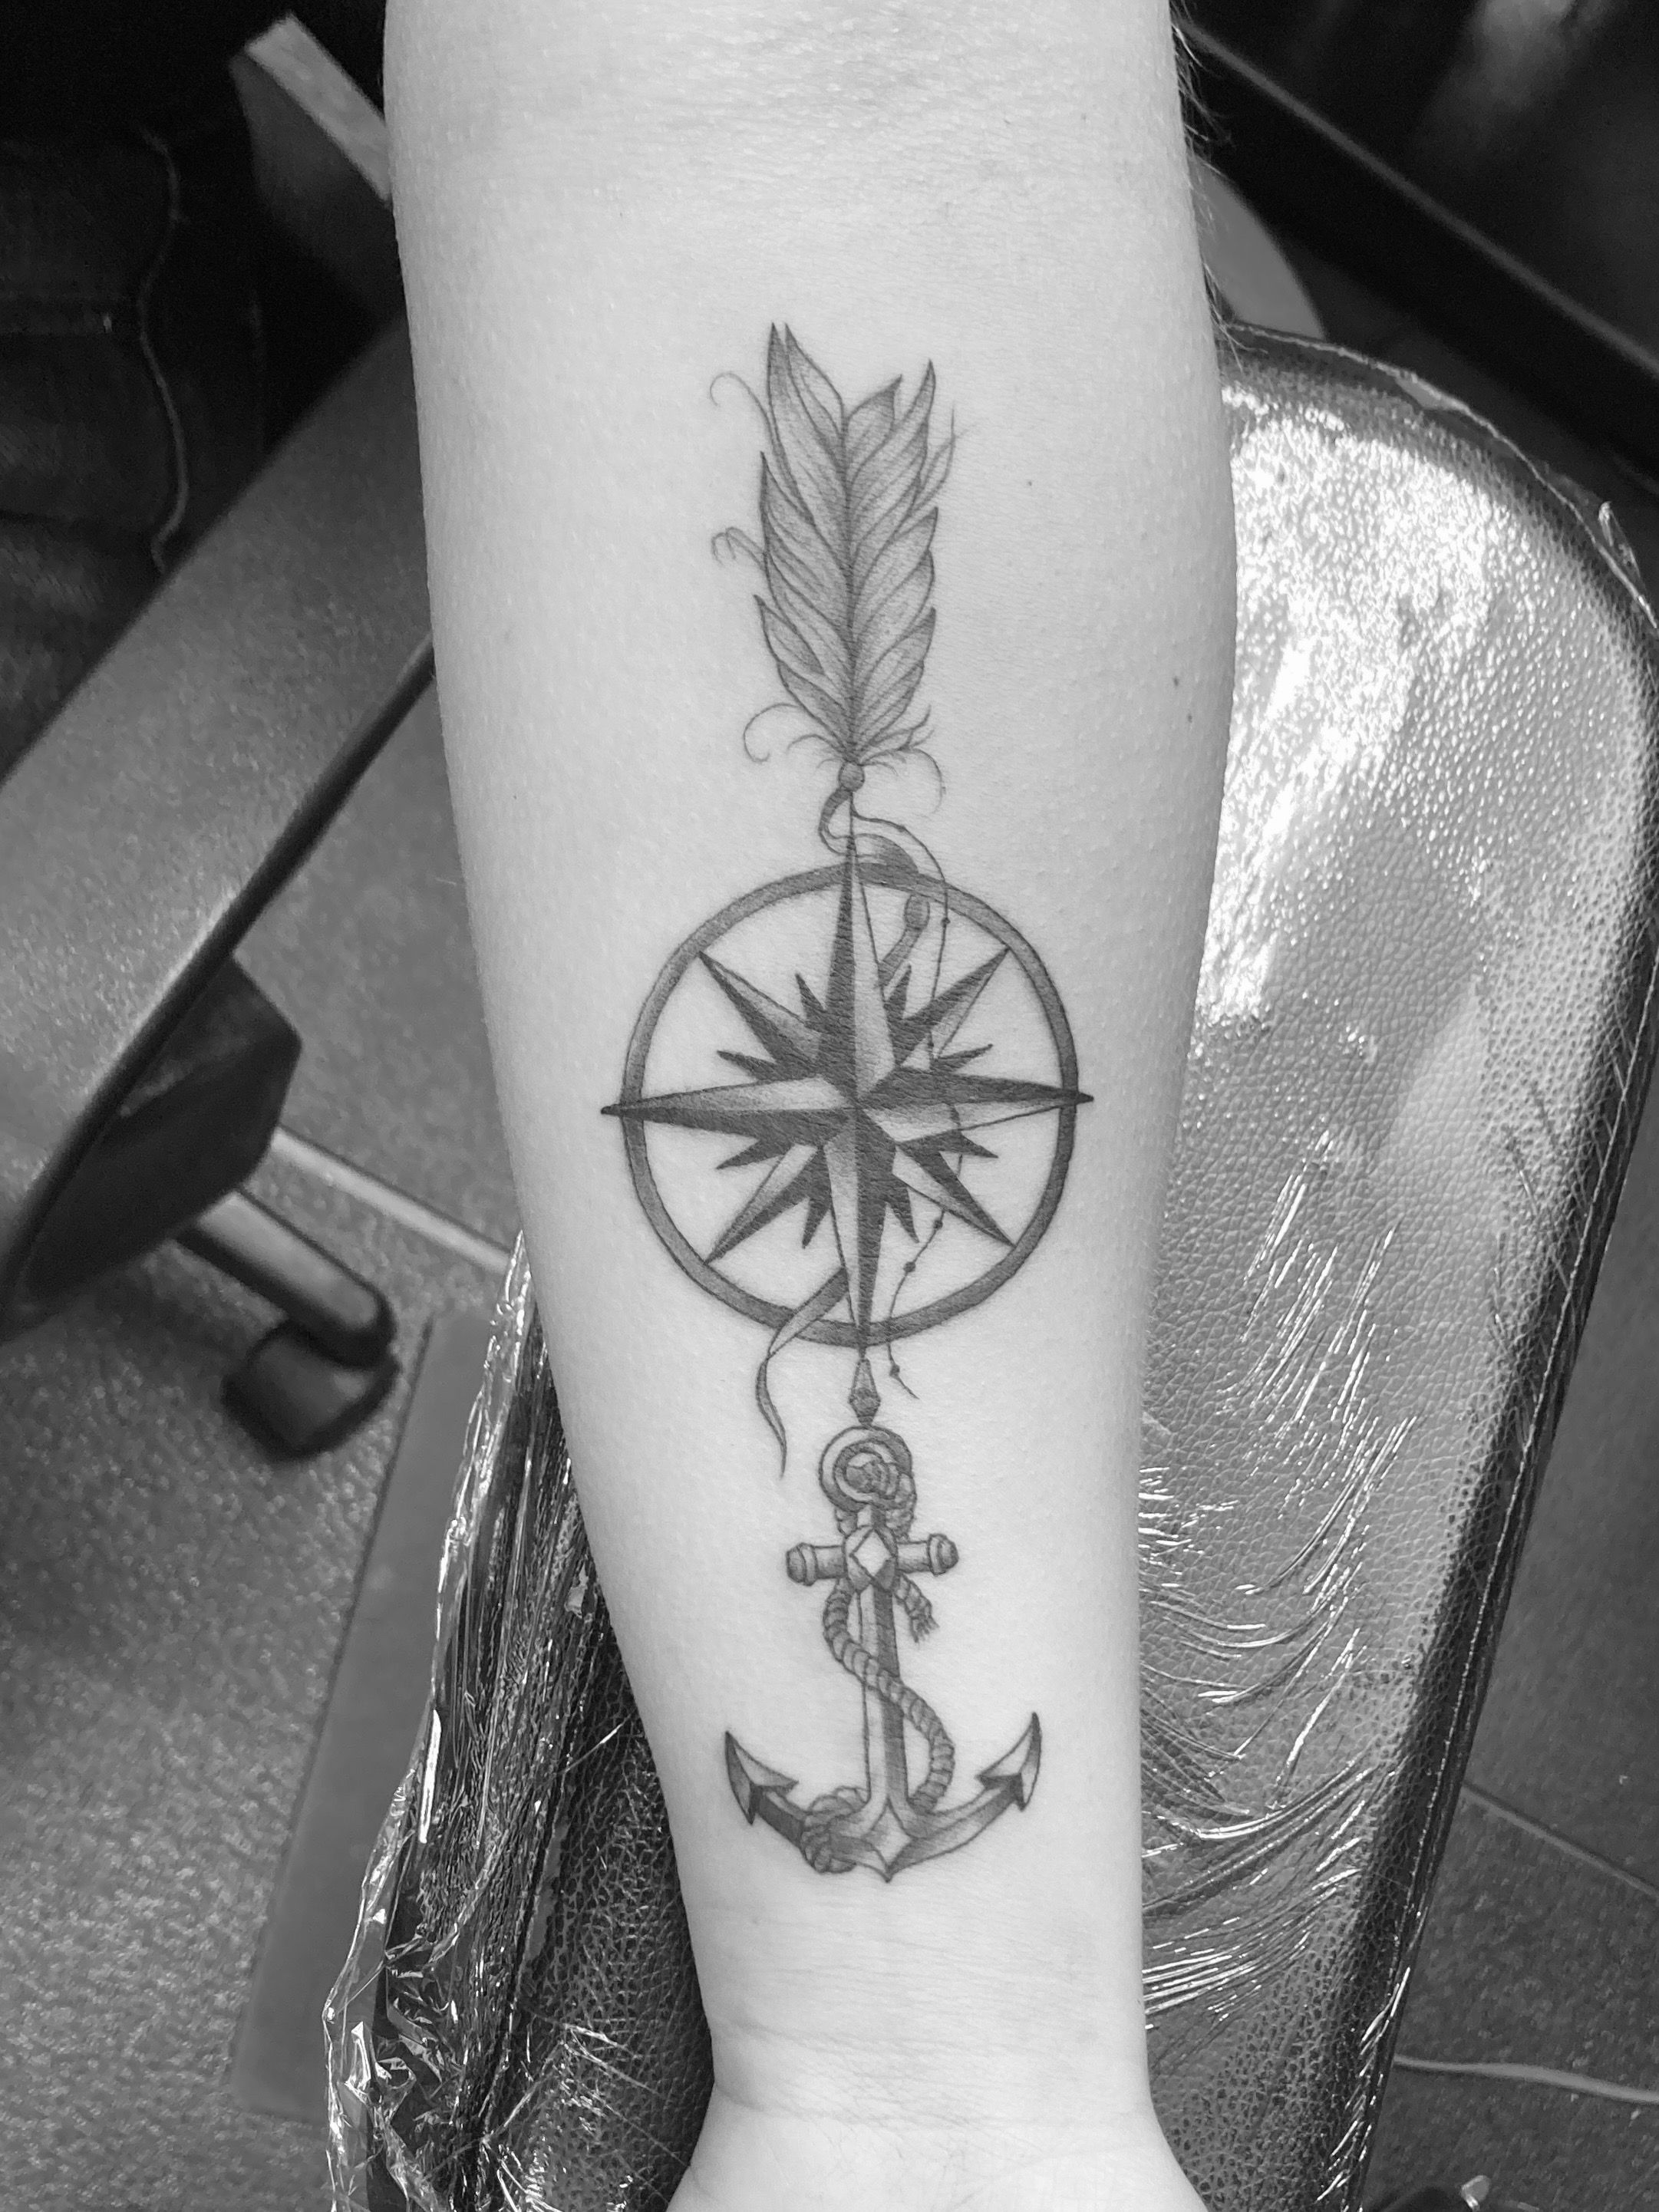 Pin by ty day on Quick Saves | Tattoos for women, Sailboat tattoo, Tattoos